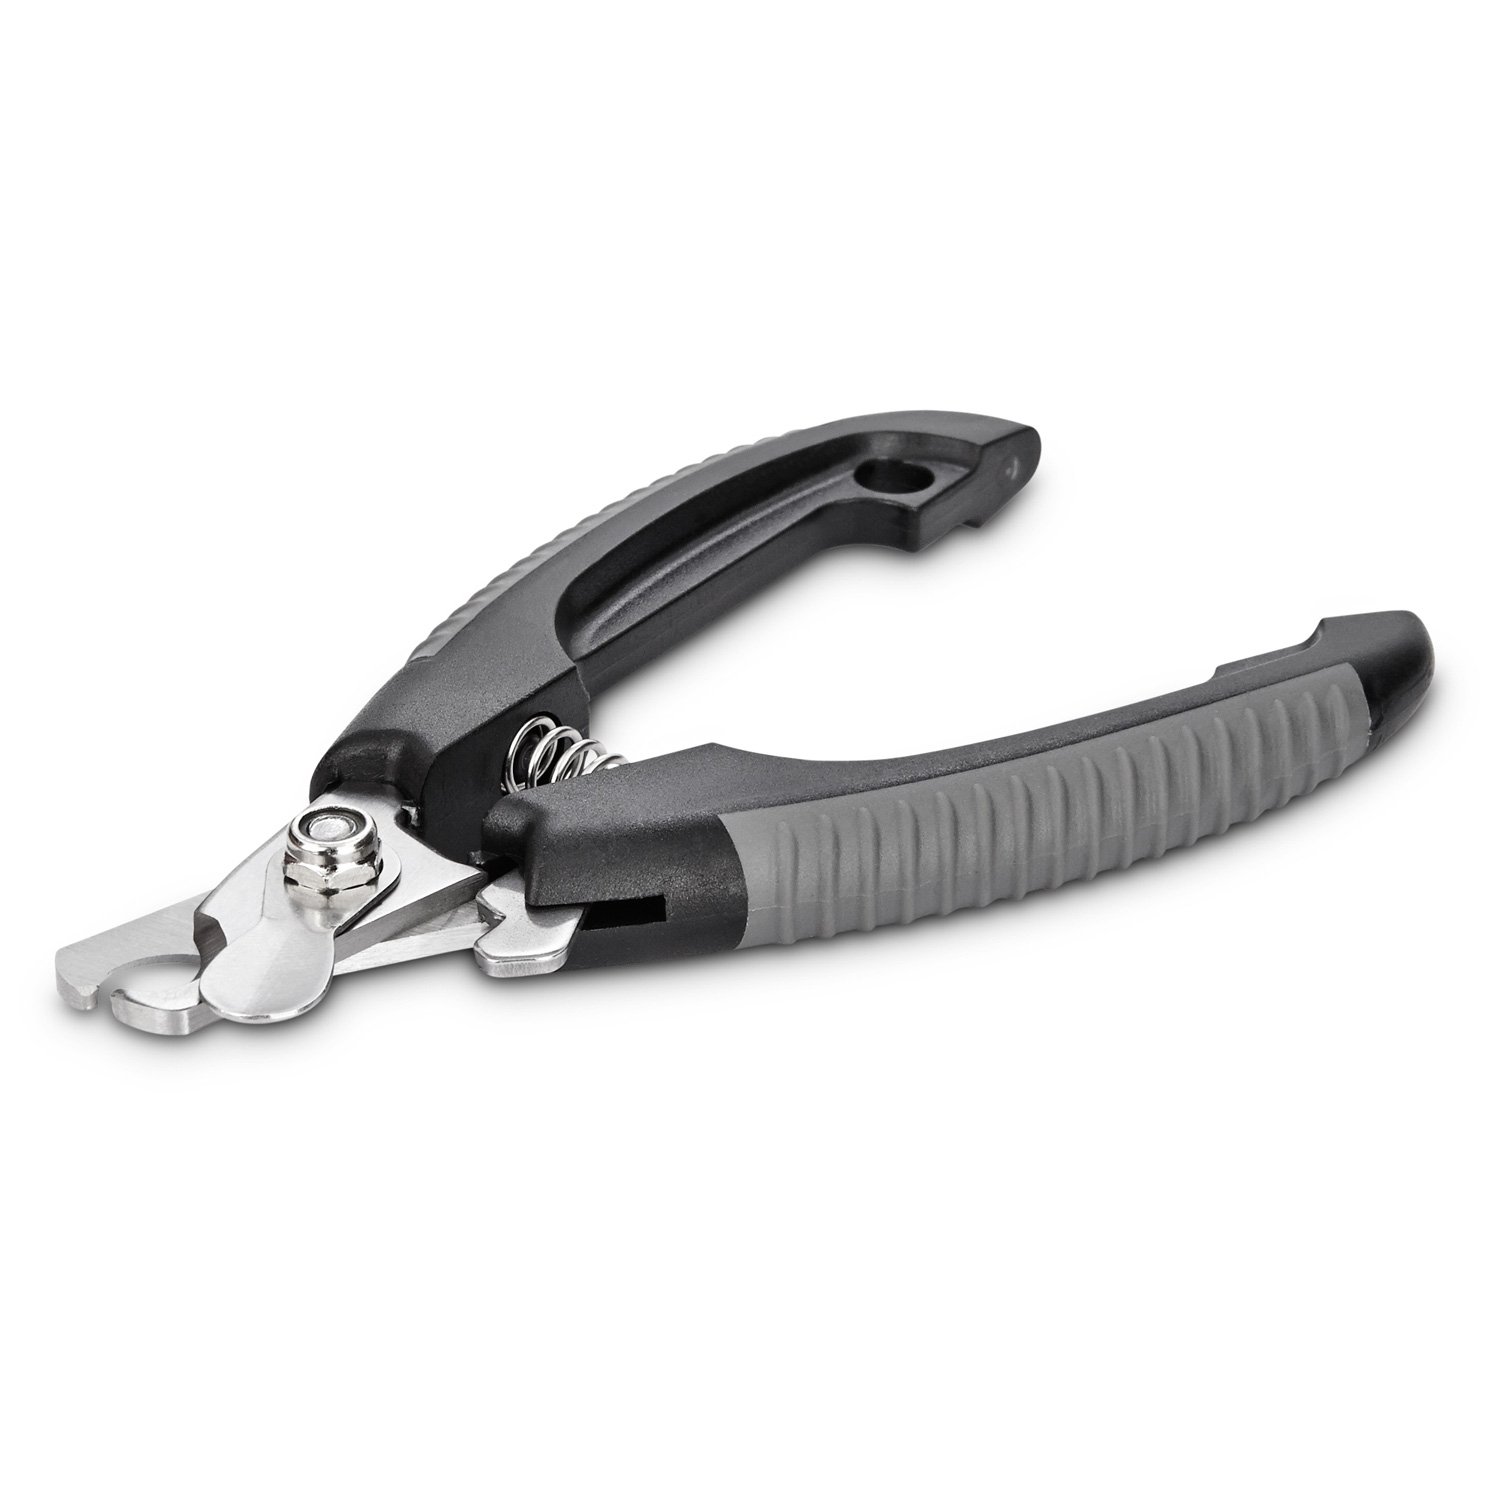 Dog nail clippers